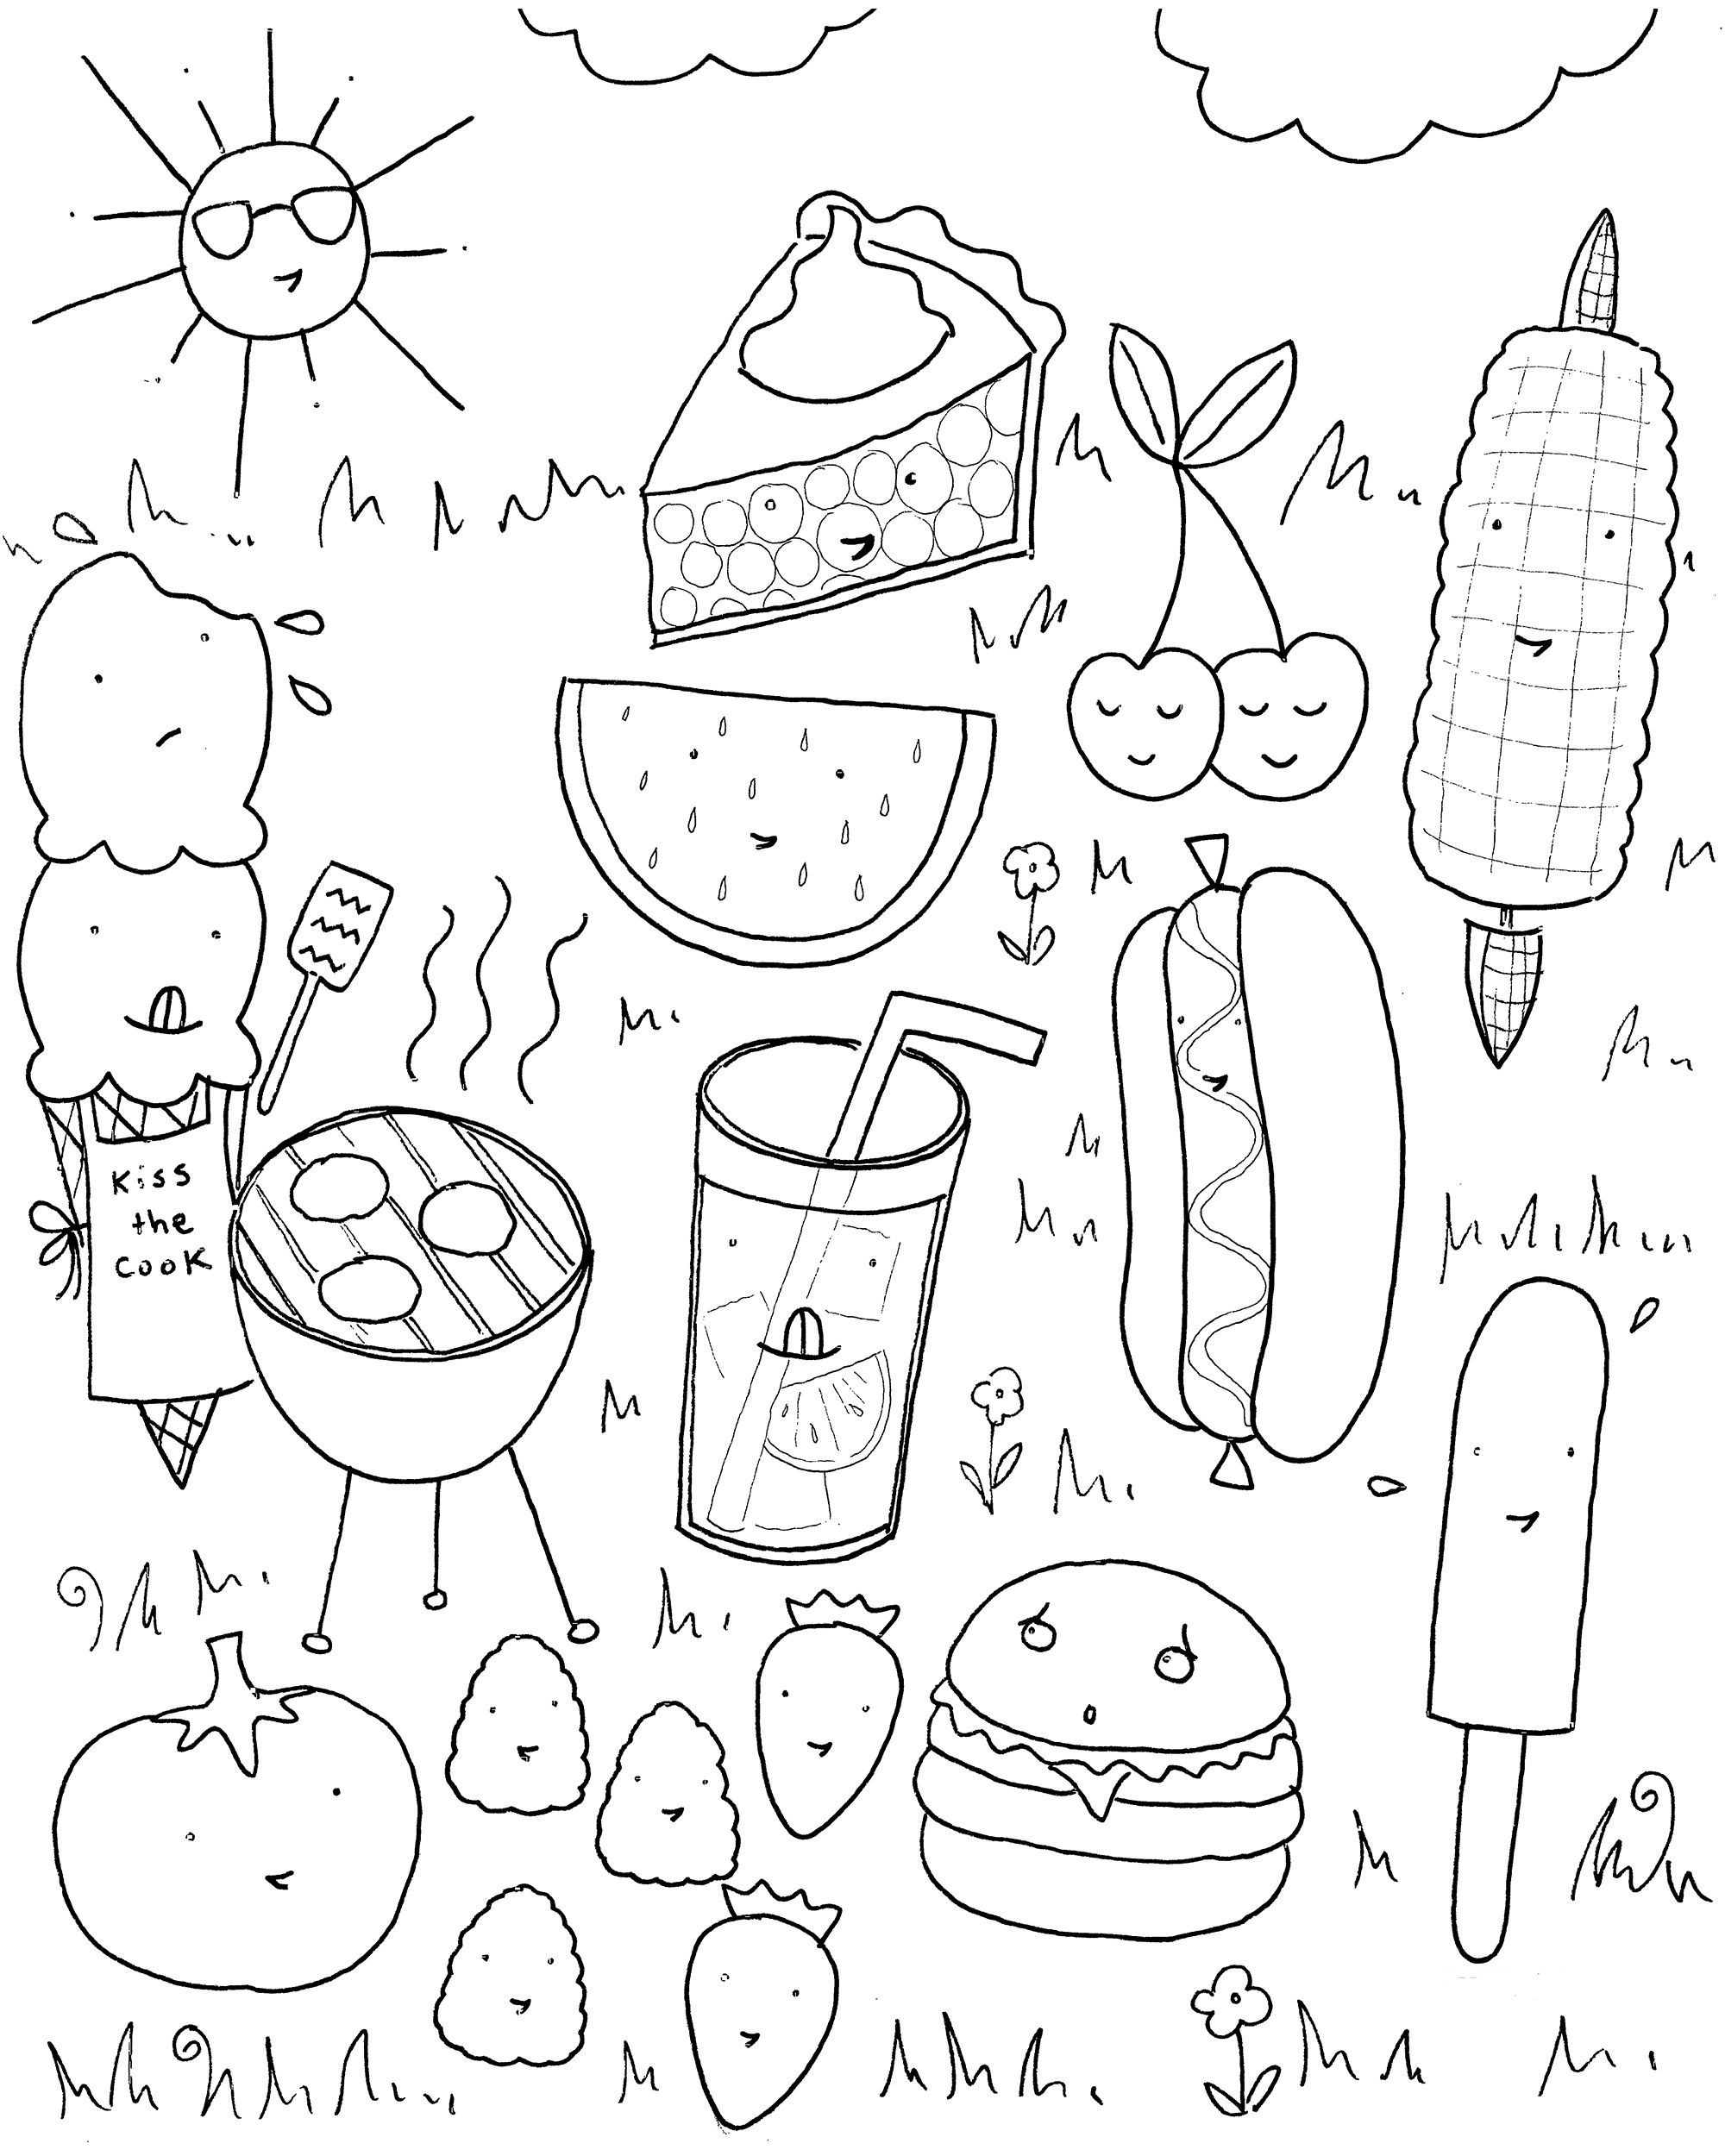 coloring pages of summer things